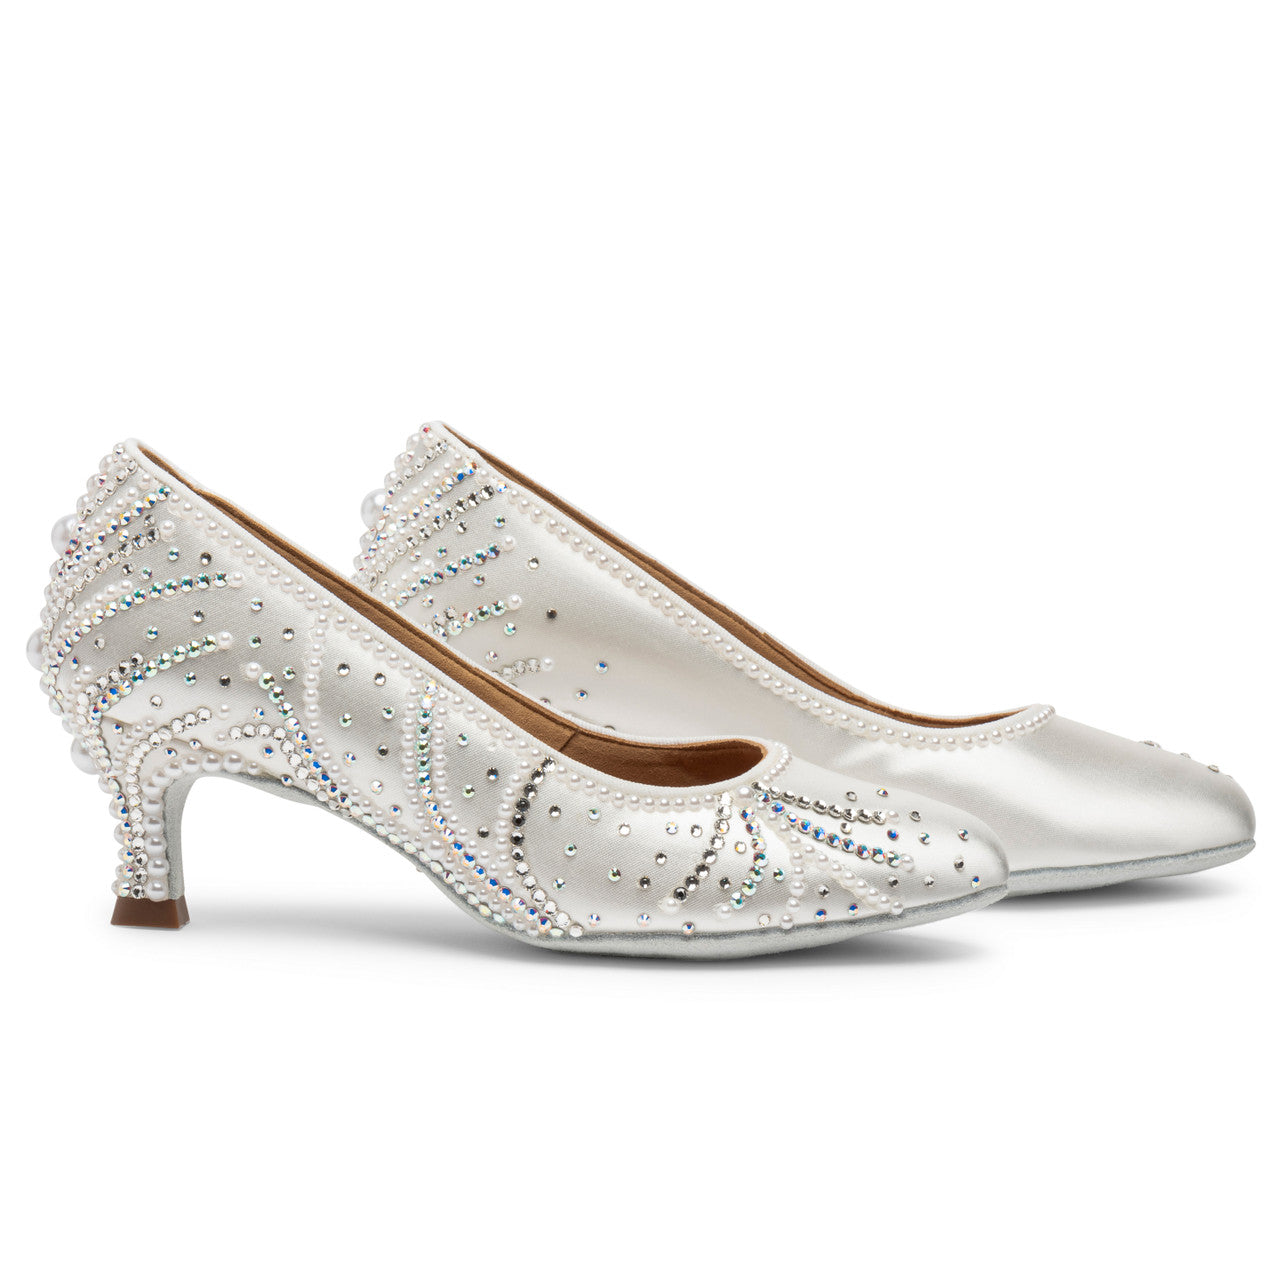 International Dance Shoes IDS White Satin ICS RoundToe by Lauren Ballroom Shoe Covered in Preciosa Crystals